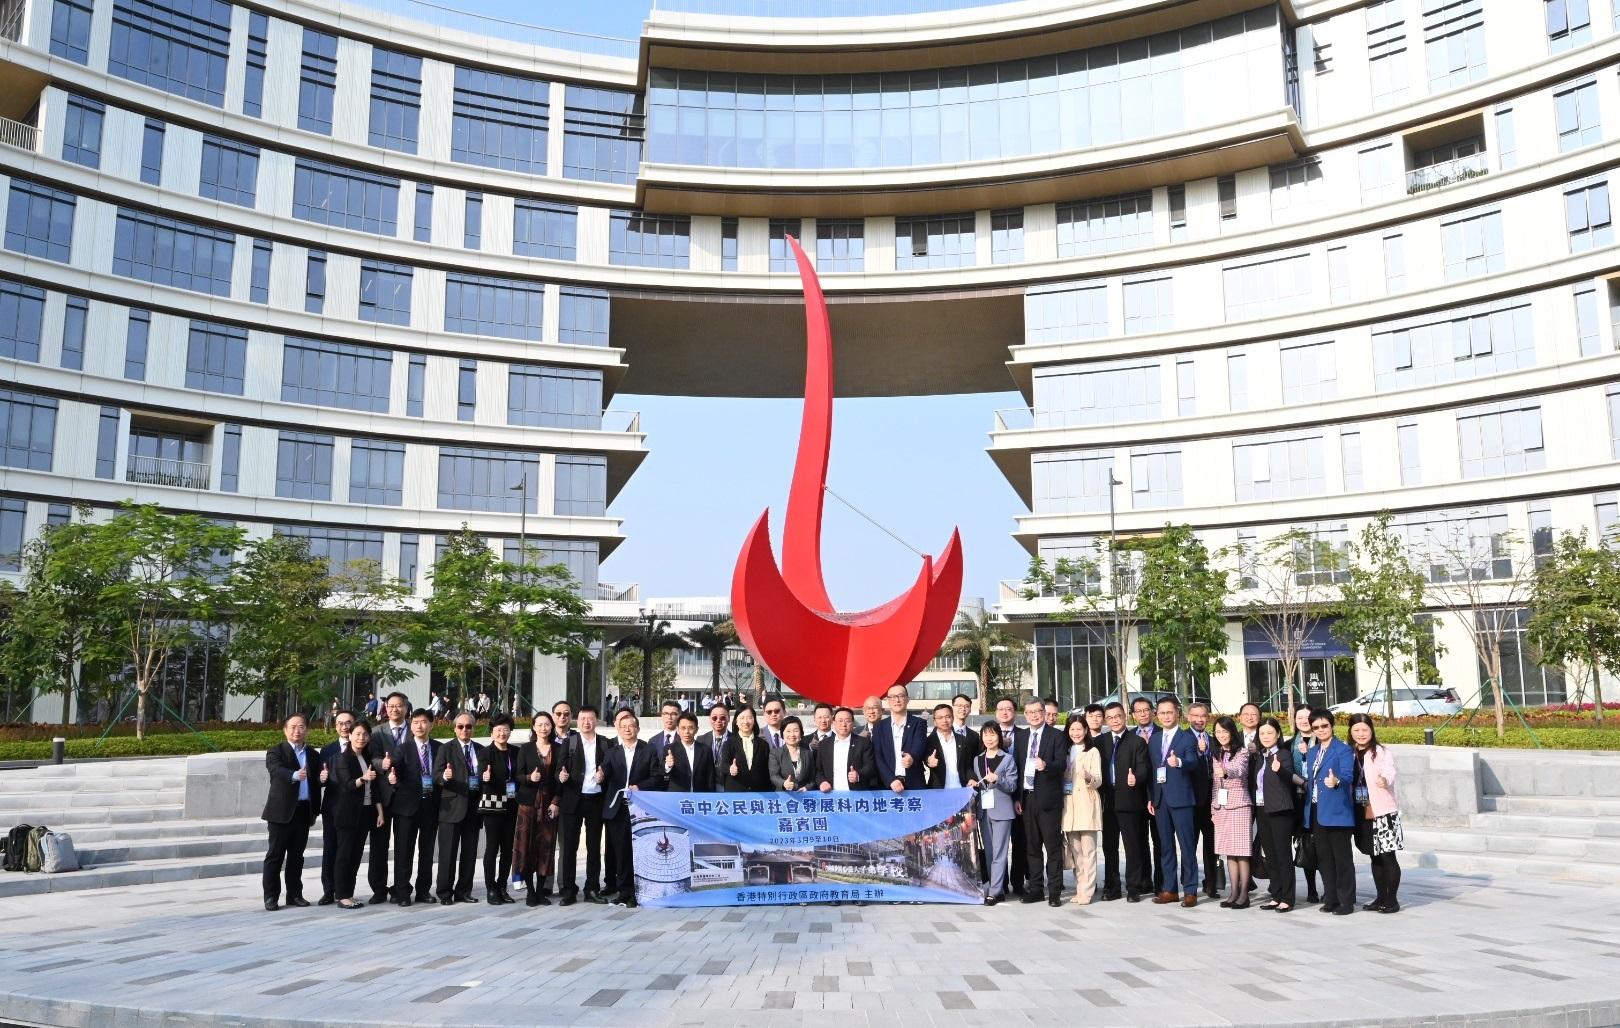 The Secretary for Education, Dr Choi Yuk-lin, continued to lead a delegation to visit Nansha, Guangzhou, and visited the Hong Kong University of Science and Technology (Guangzhou) (HKUST(GZ)) today (March 10). Photo shows Dr Choi (front row, eleventh left); the Permanent Secretary for Education, Ms Michelle Li (front row, tenth left); the First-level Inspector of the Department of Education of Guangdong Province, Mr Zhu Chaohua (front row, ninth left); and the President of HKUST(GZ), Professor Lionel Ni Ming-shuan (front row, twelfth left), with other members of the delegation.